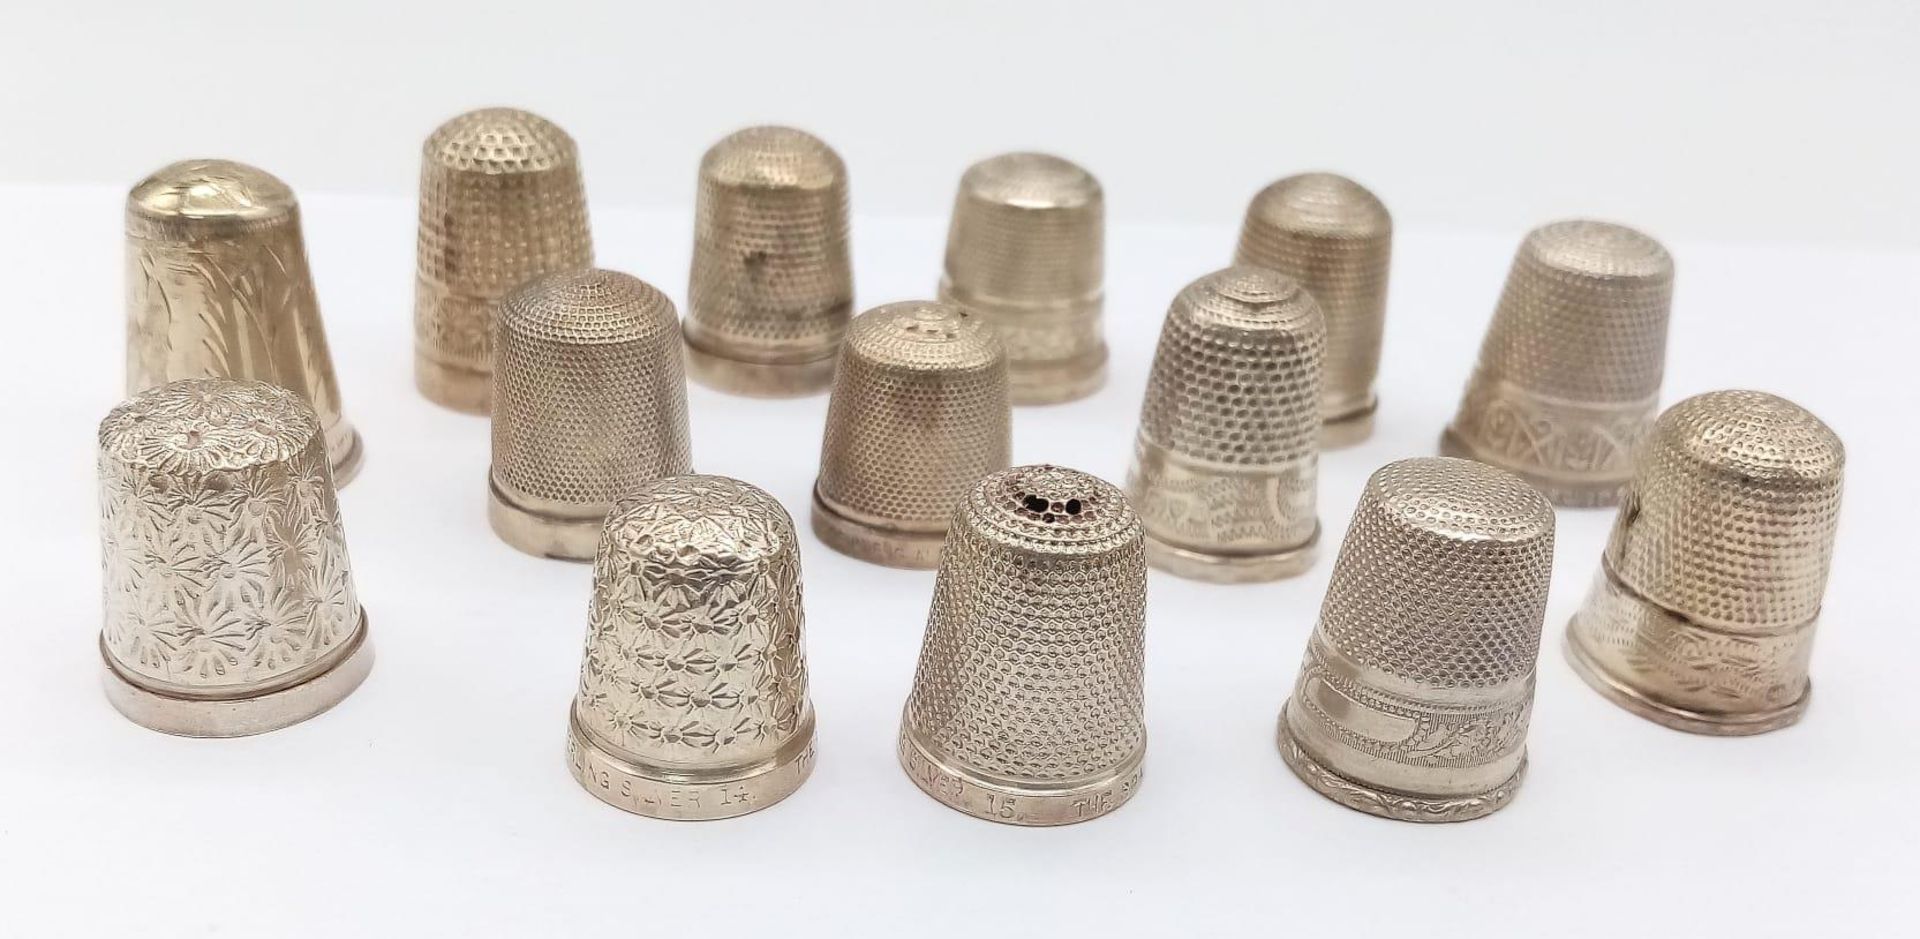 A Wonderful Collection of 14 Vintage/Antique Sterling Silver Thimbles. Different styles. Largest